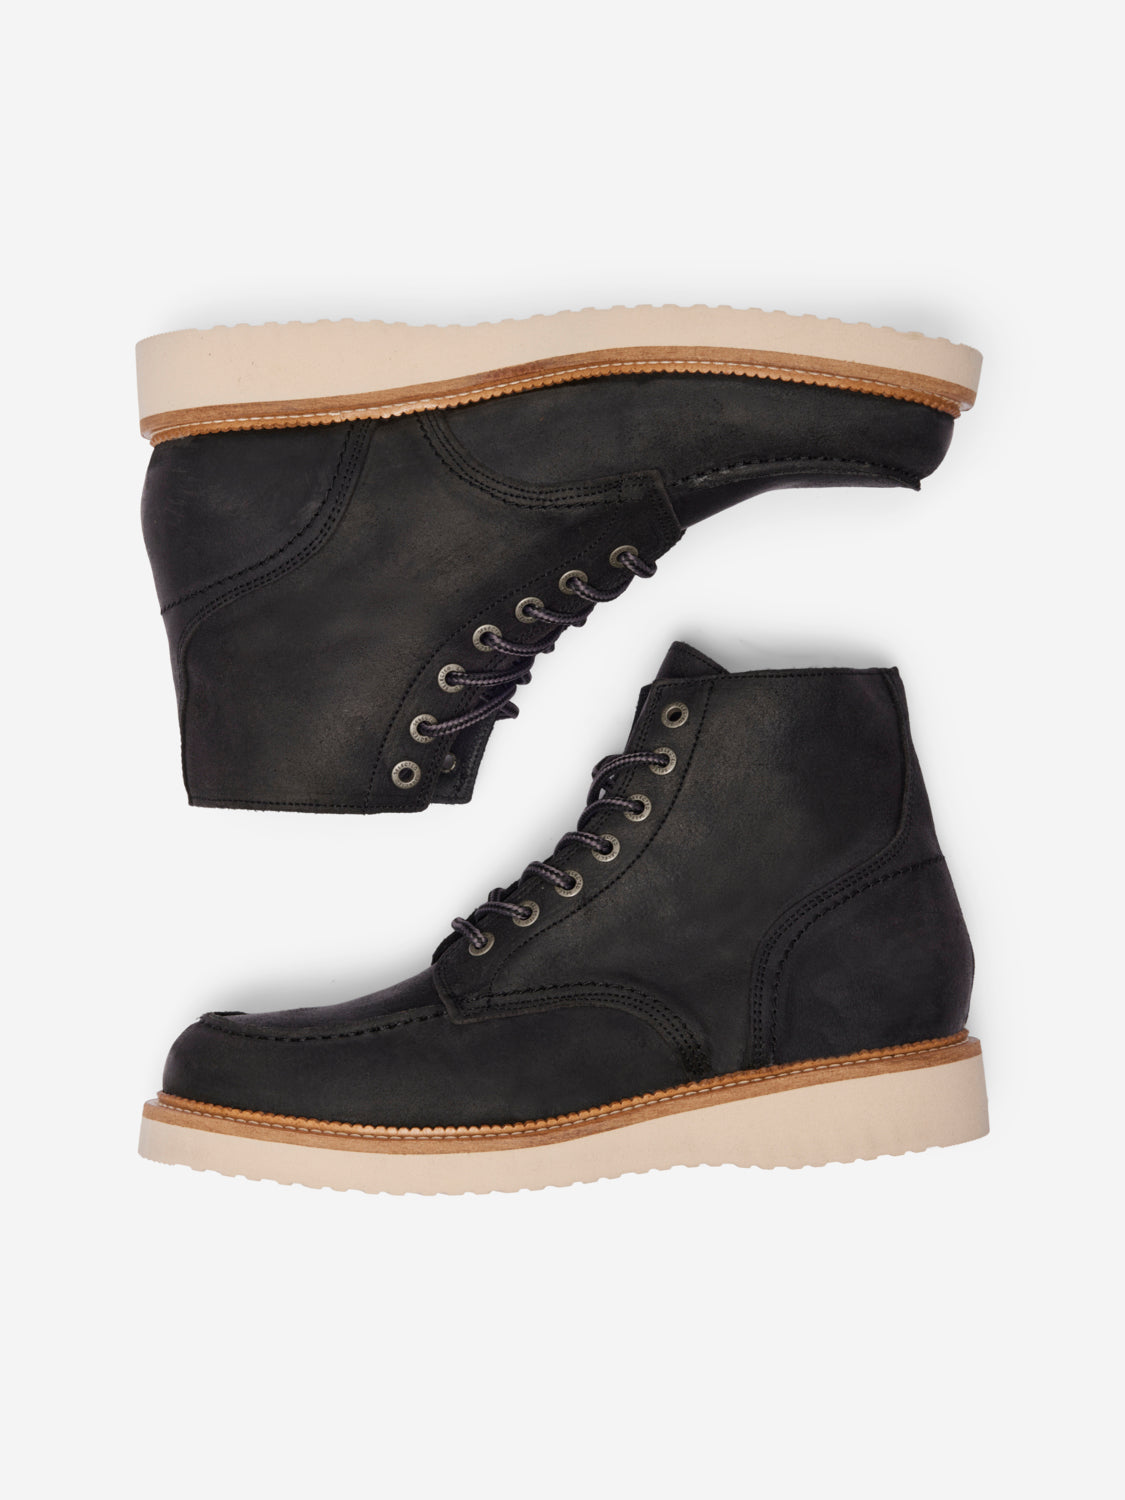 SLHTEO Boots - Black